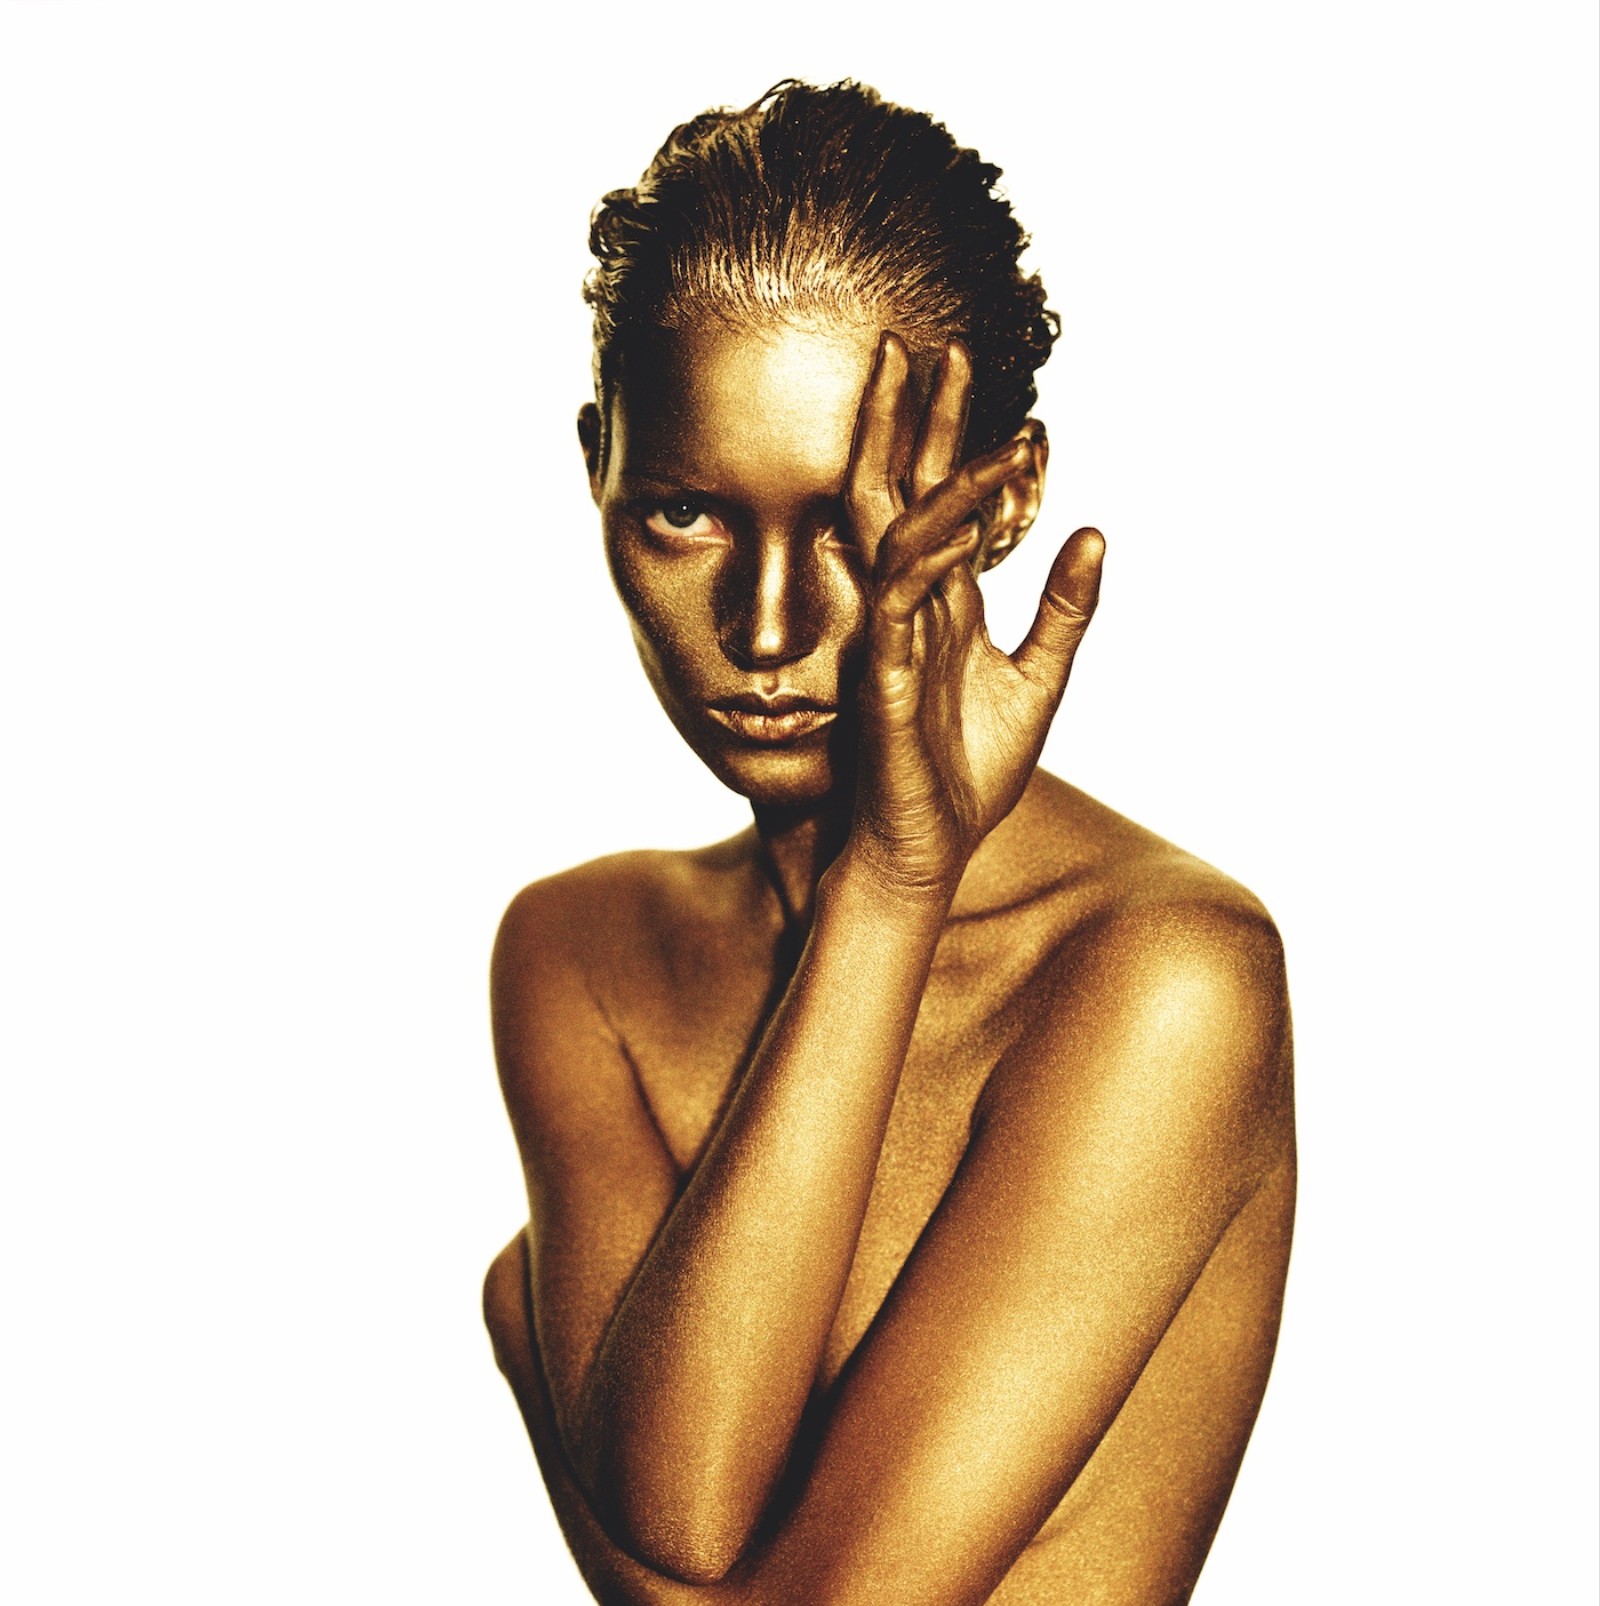 kate moss wearing gold body paint covering one eye